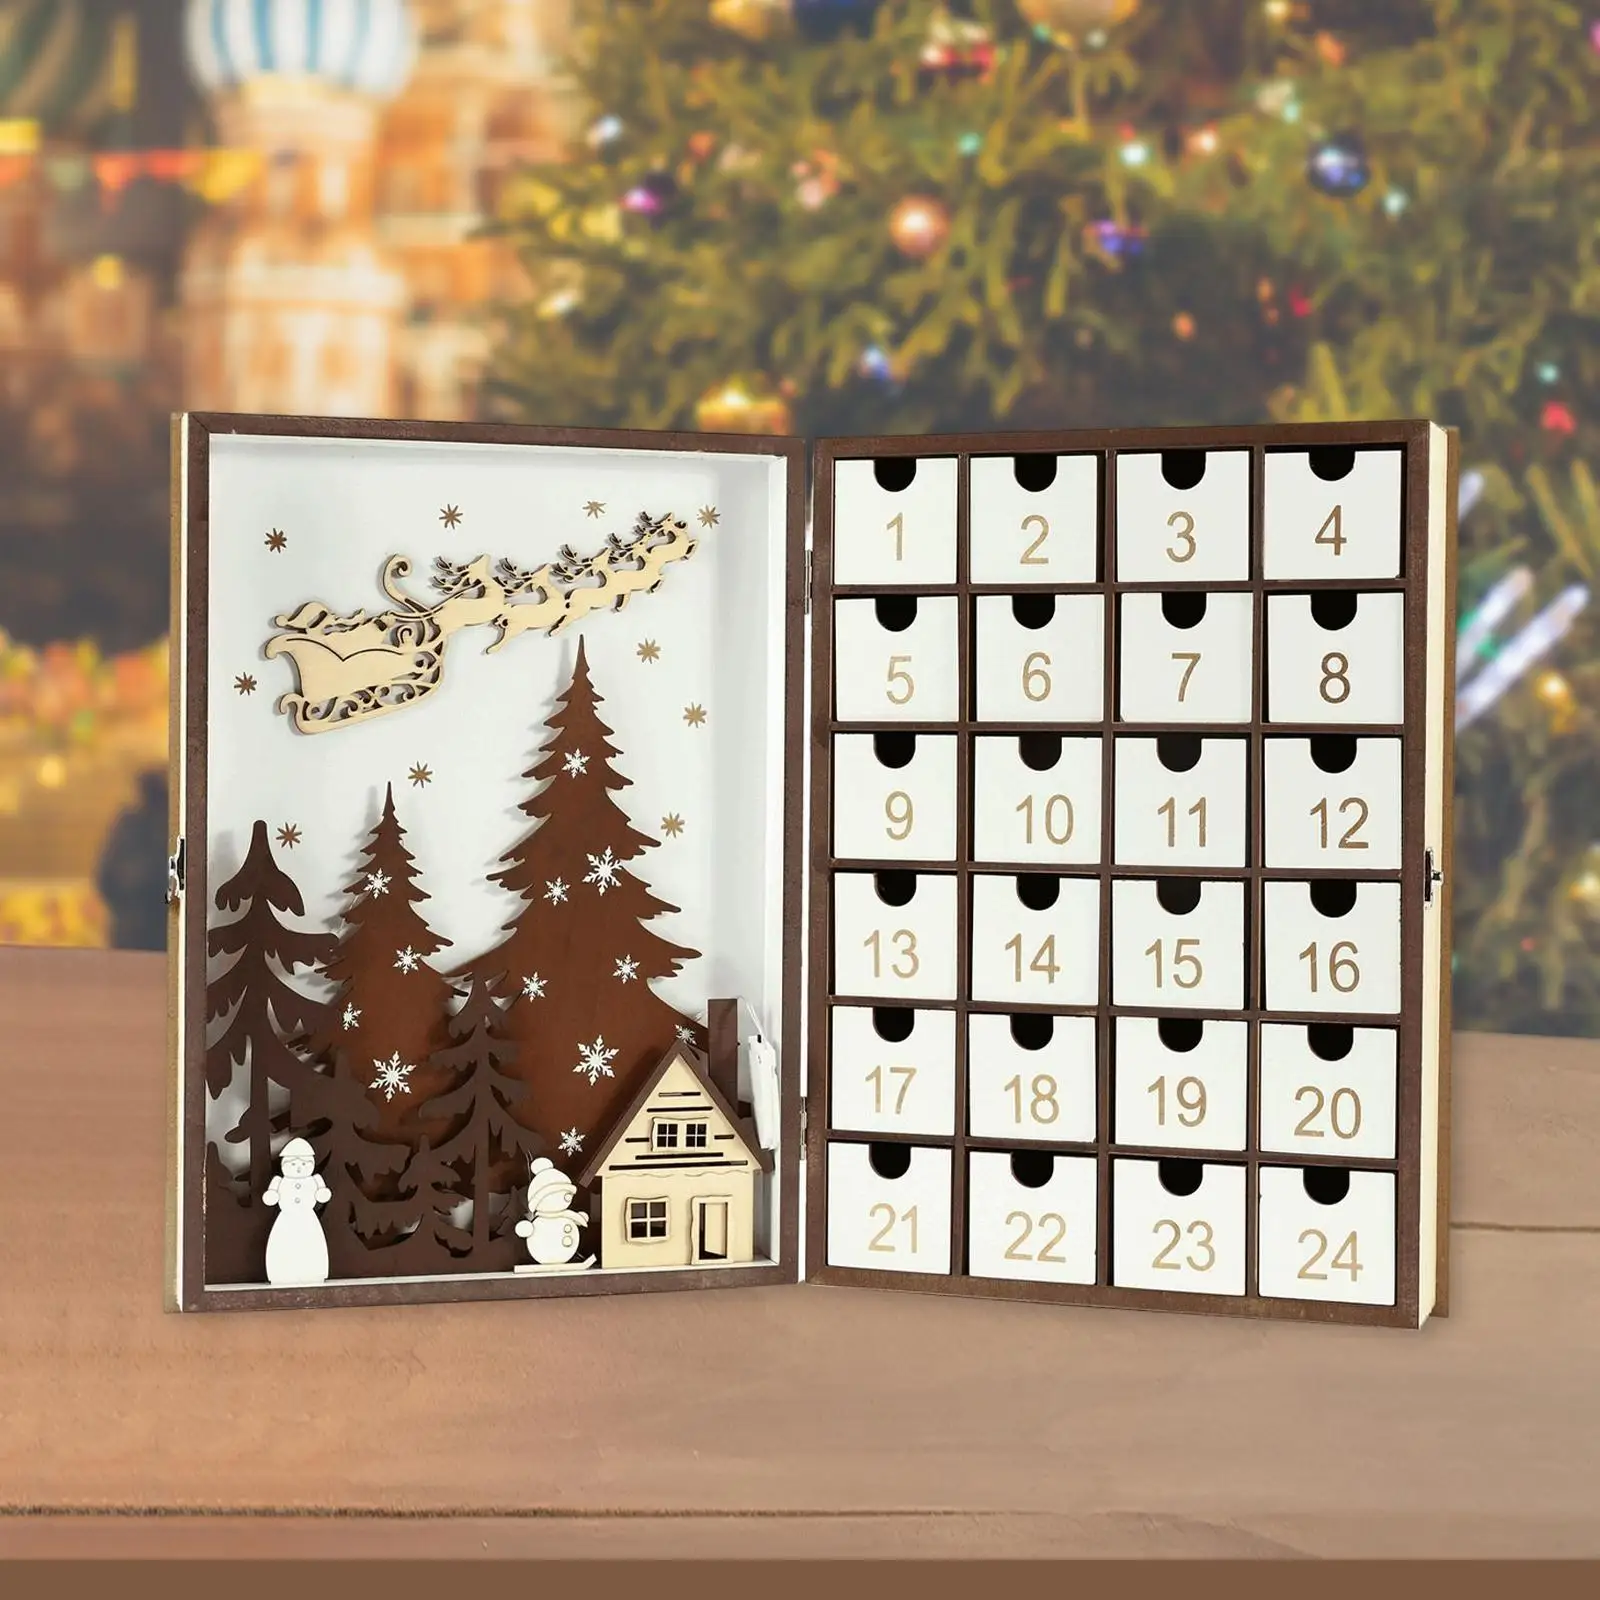 Wooden advent calendar Book Durable with Drawers Advent Calendar for Holiday